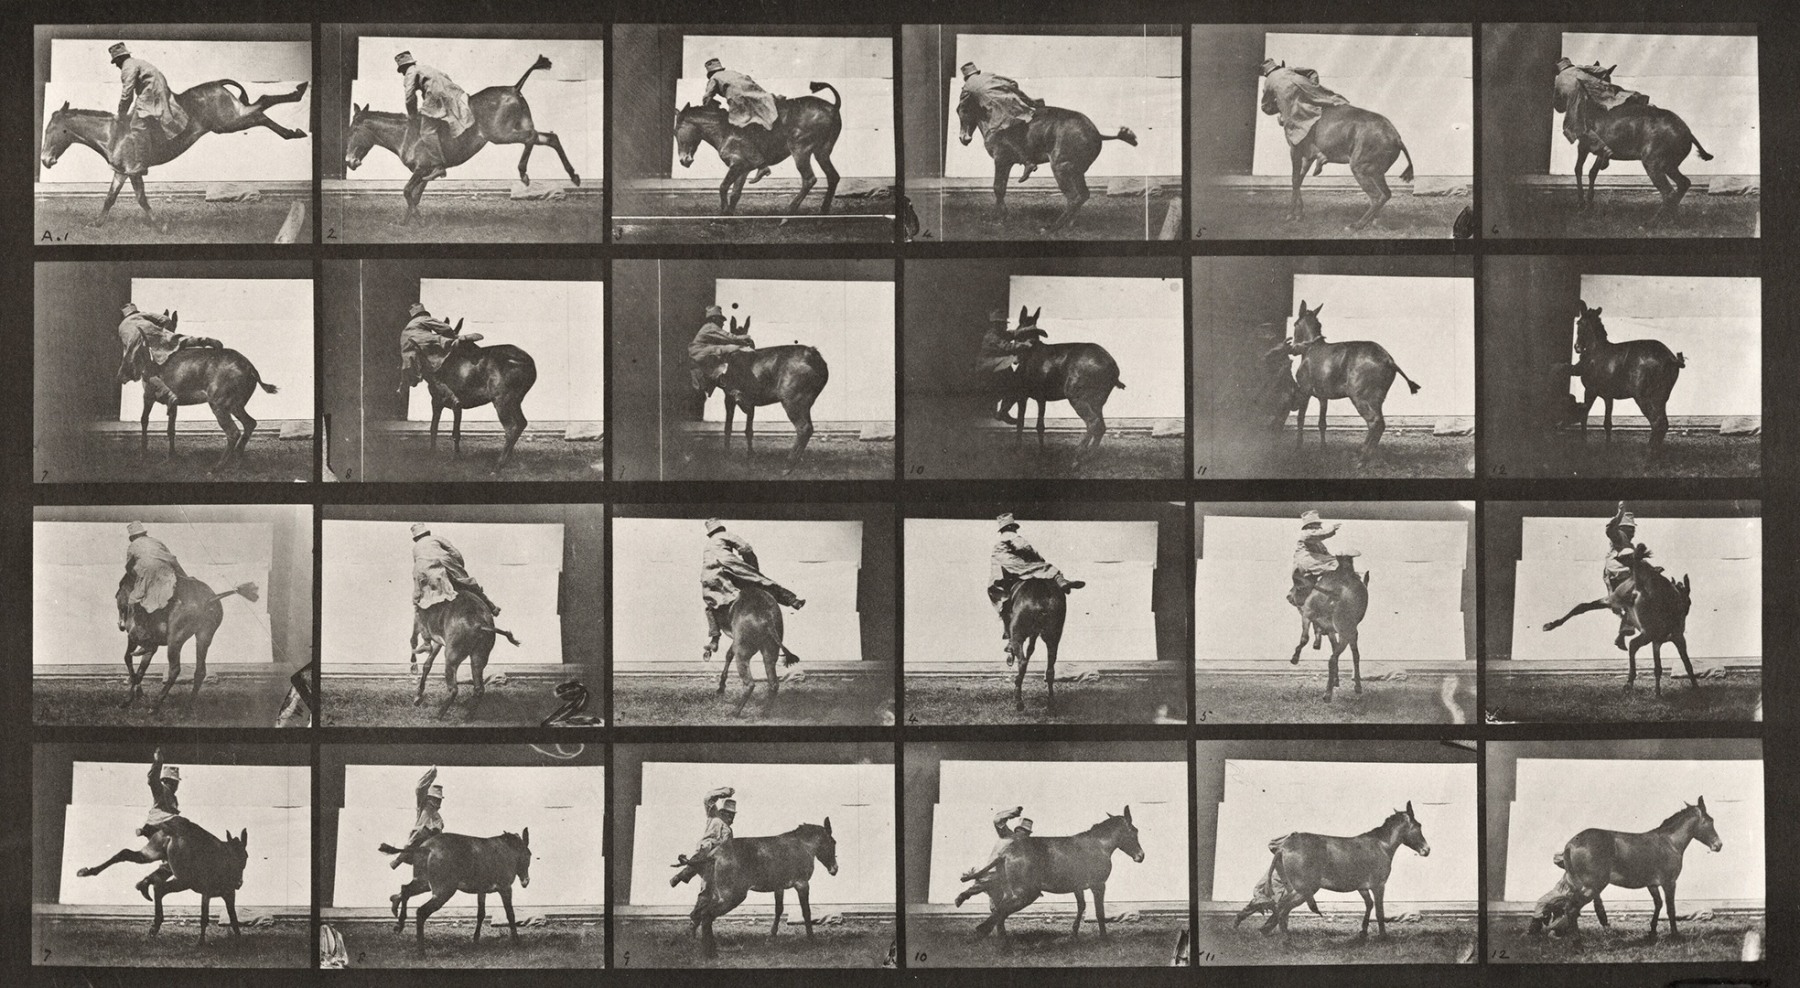 Sequence of black and white photos showing the movements of a man trying to ride a mule, and falling off onto the ground